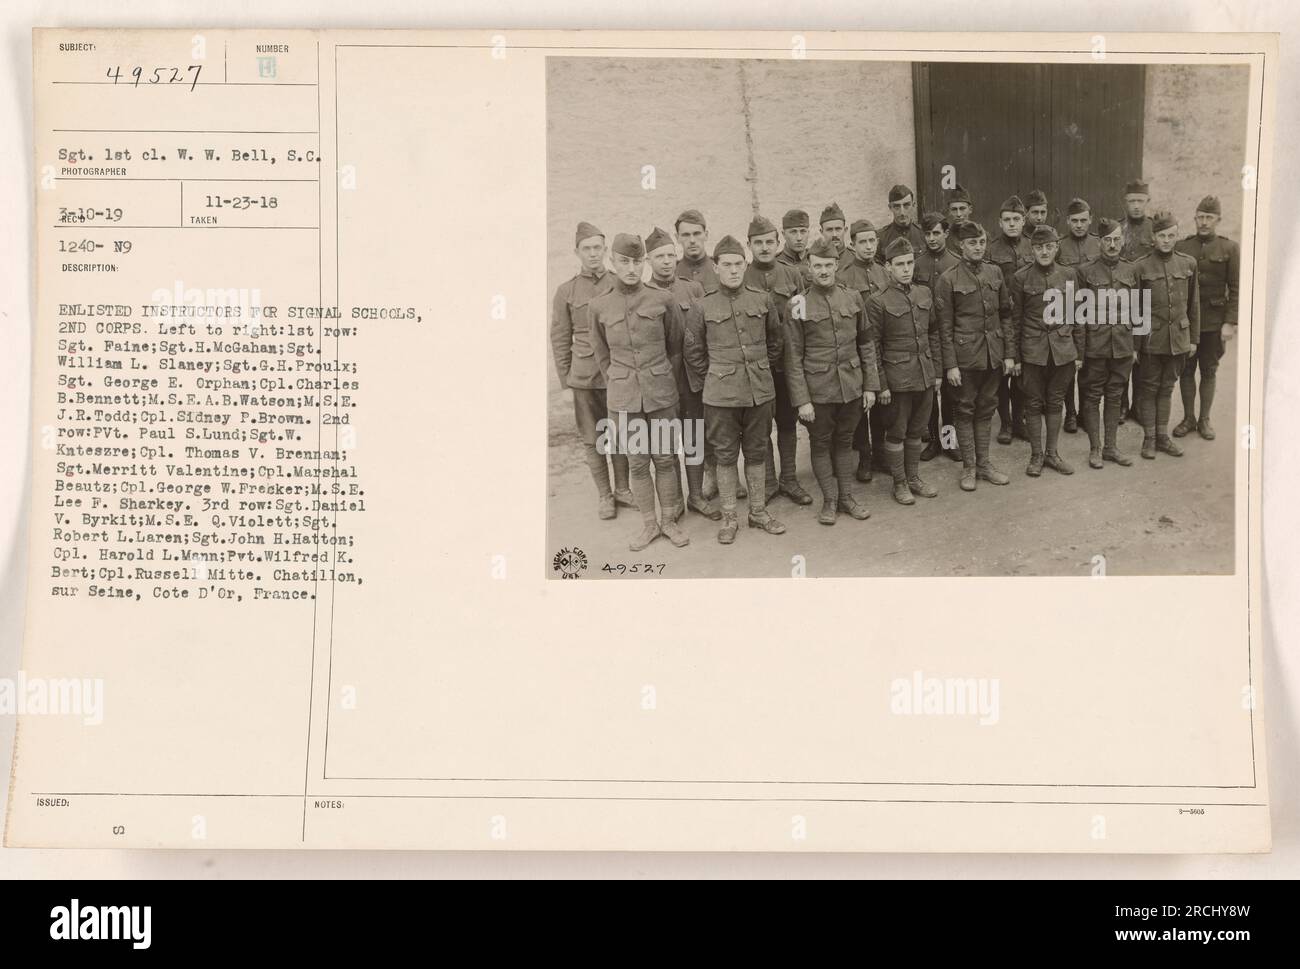 Enlisted instructors for Signal Schools, 2nd Corps in Chatillon-Sur-Seine, Cote d'Or, France. Sgt. W.W. Bell, S.C., took the photograph. The picture features several individuals in three rows, with their names included in the caption. Information regarding date, description, and notes is also provided. Stock Photo